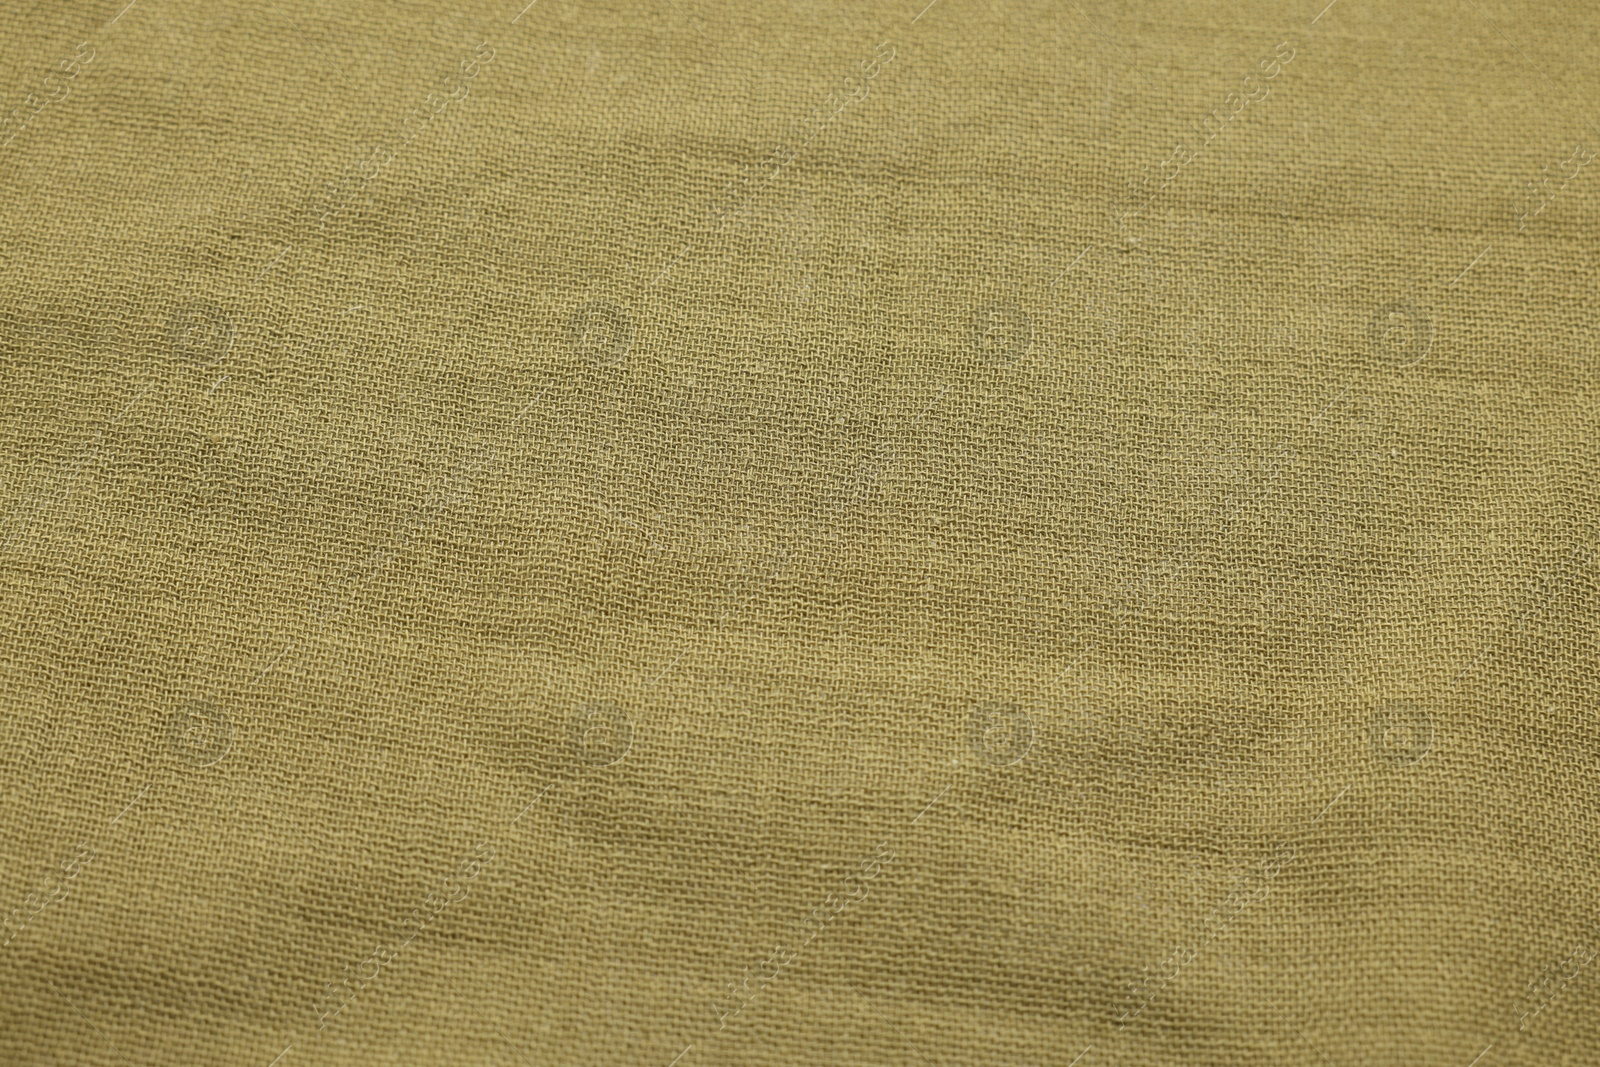 Photo of Texture of olive fabric as background, above view